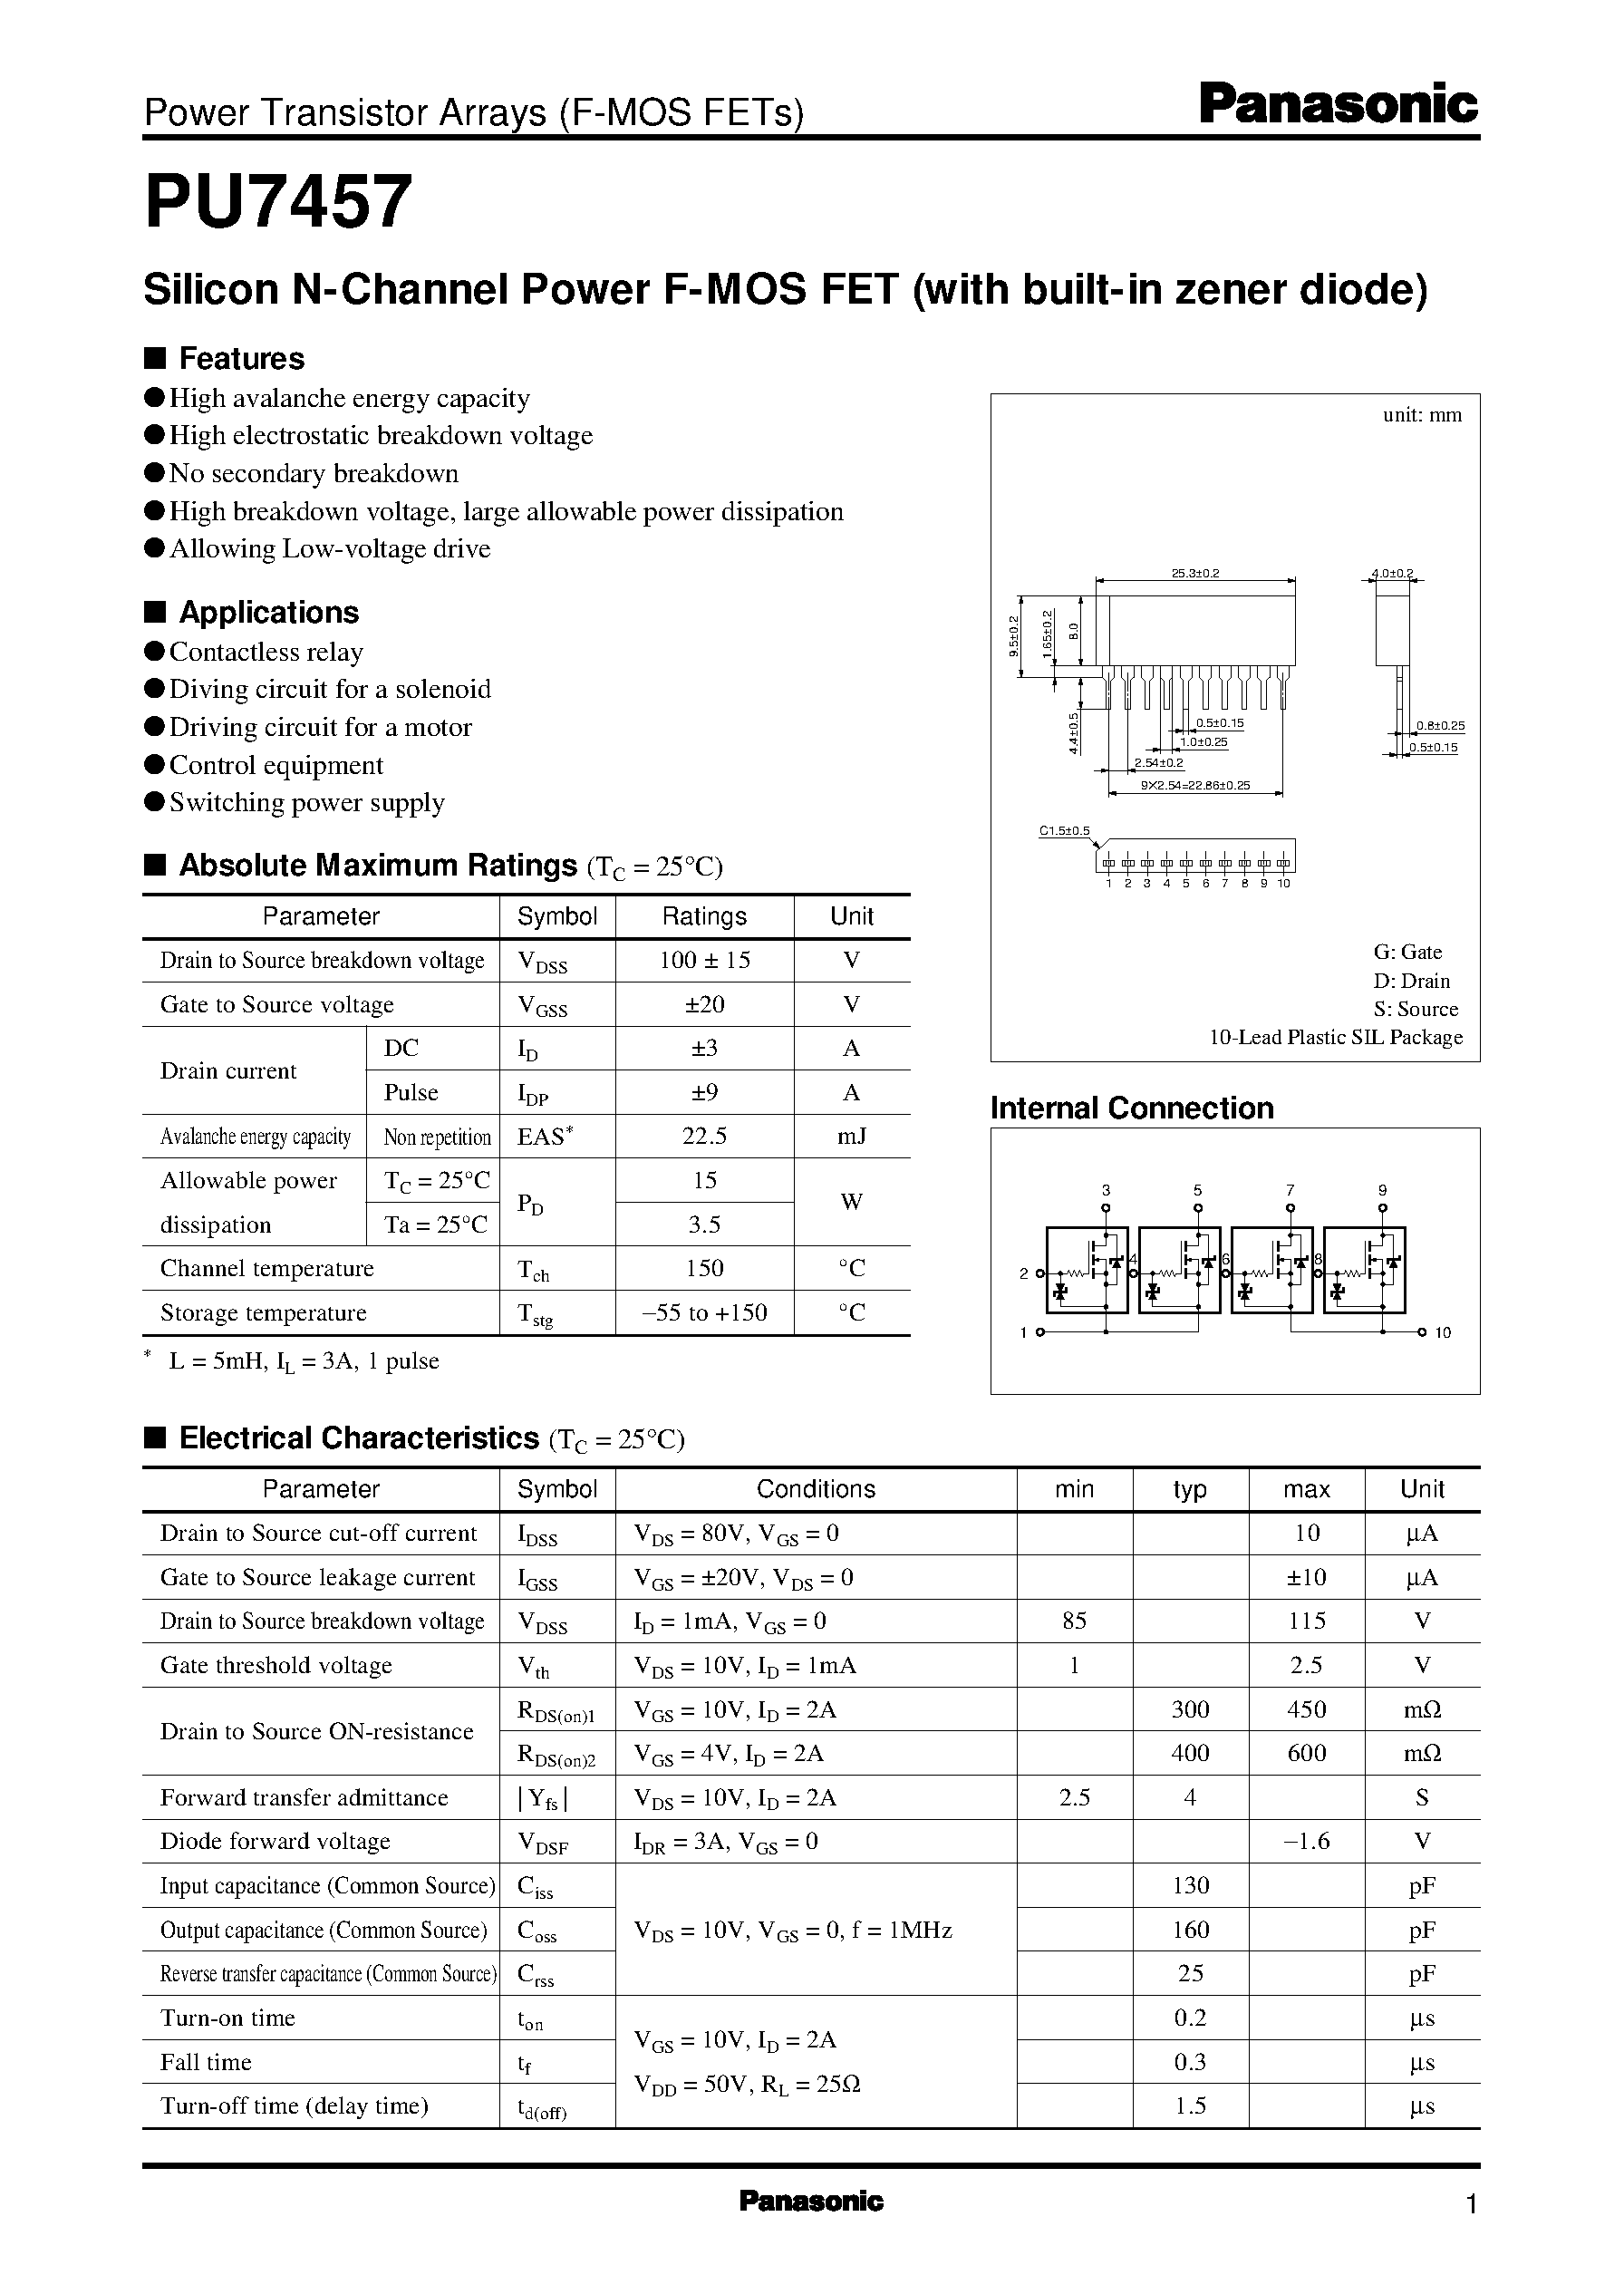 Datasheet PU7457 - Silicon N-Channel Power F-MOS FET (with built-in zener diode) page 1